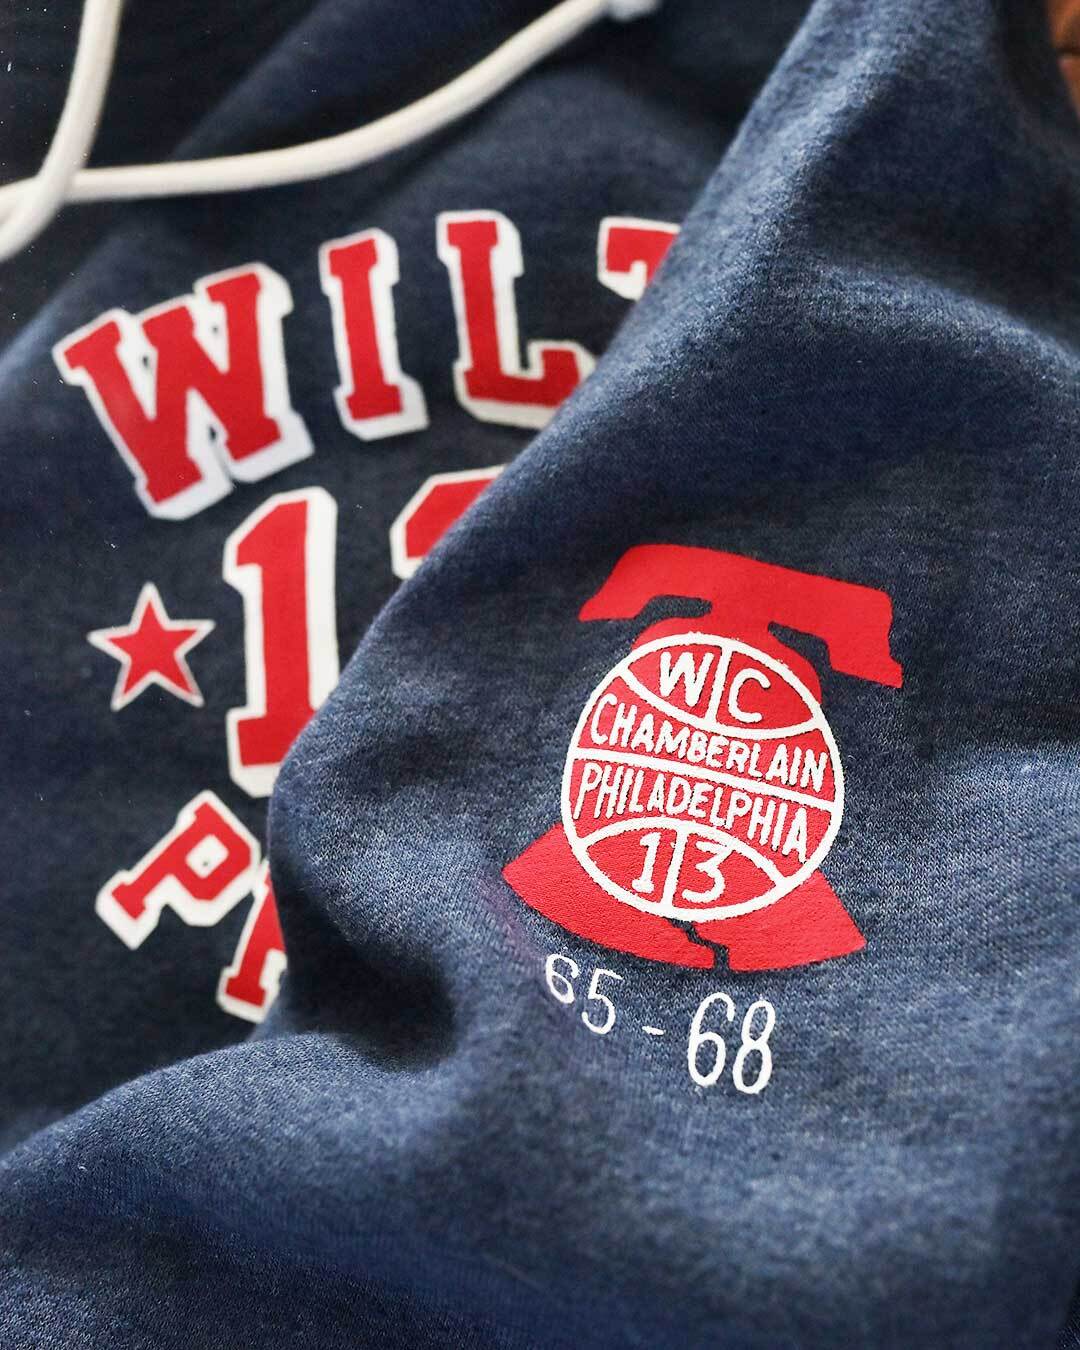 Wilt Chamberlain #13 Philly Navy PO Hoody - Roots of Fight